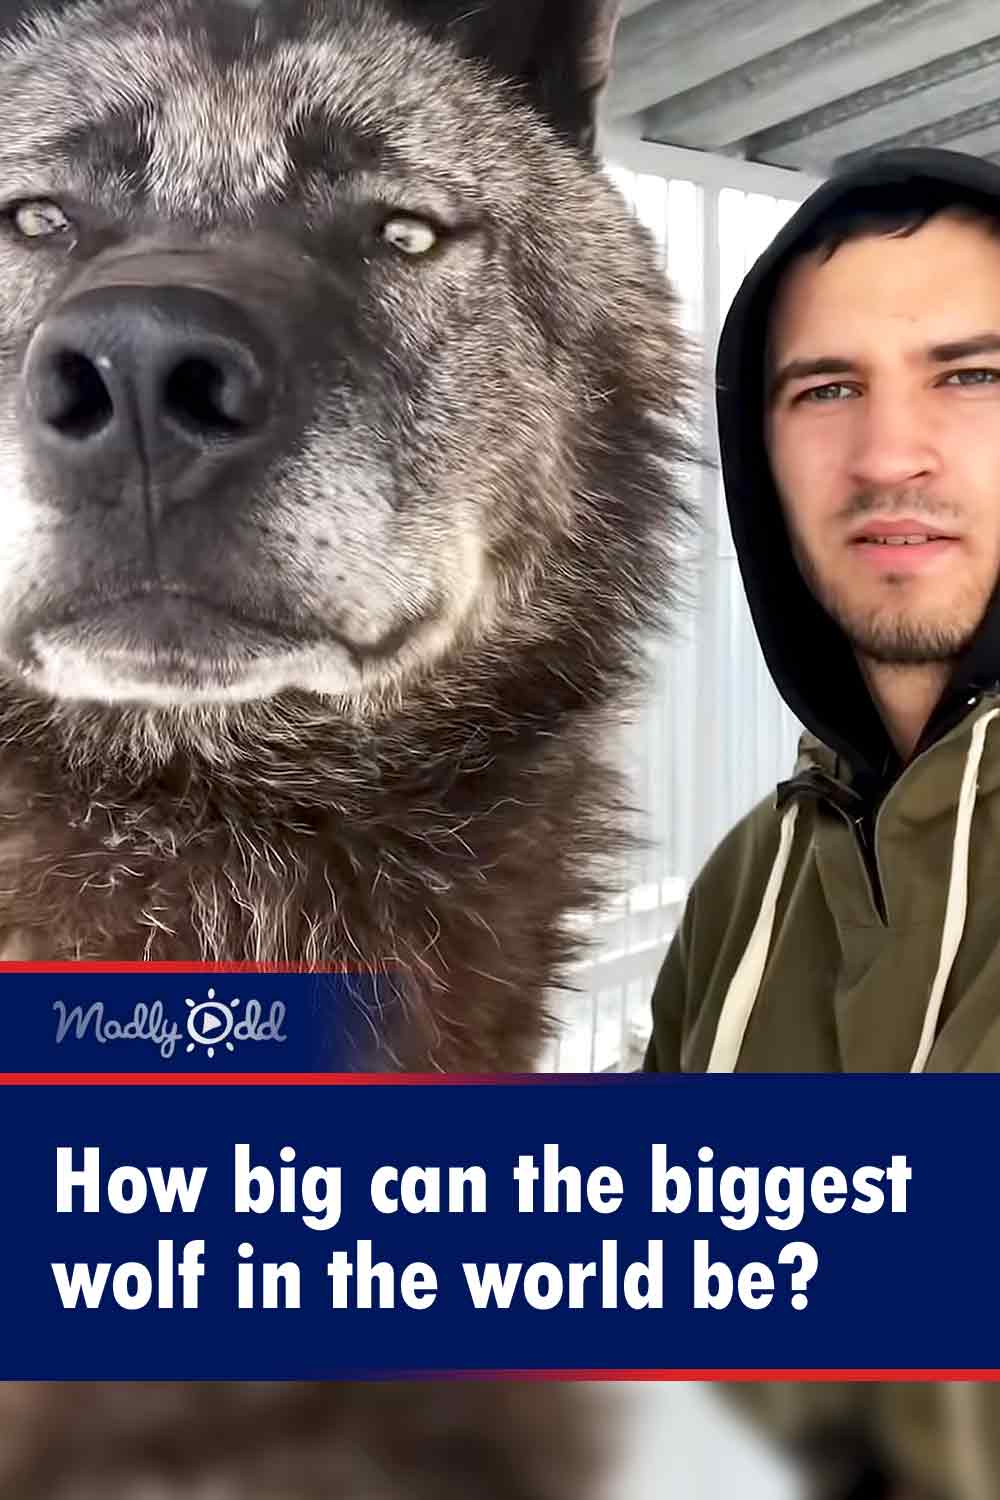 How big can the biggest wolf in the world be?